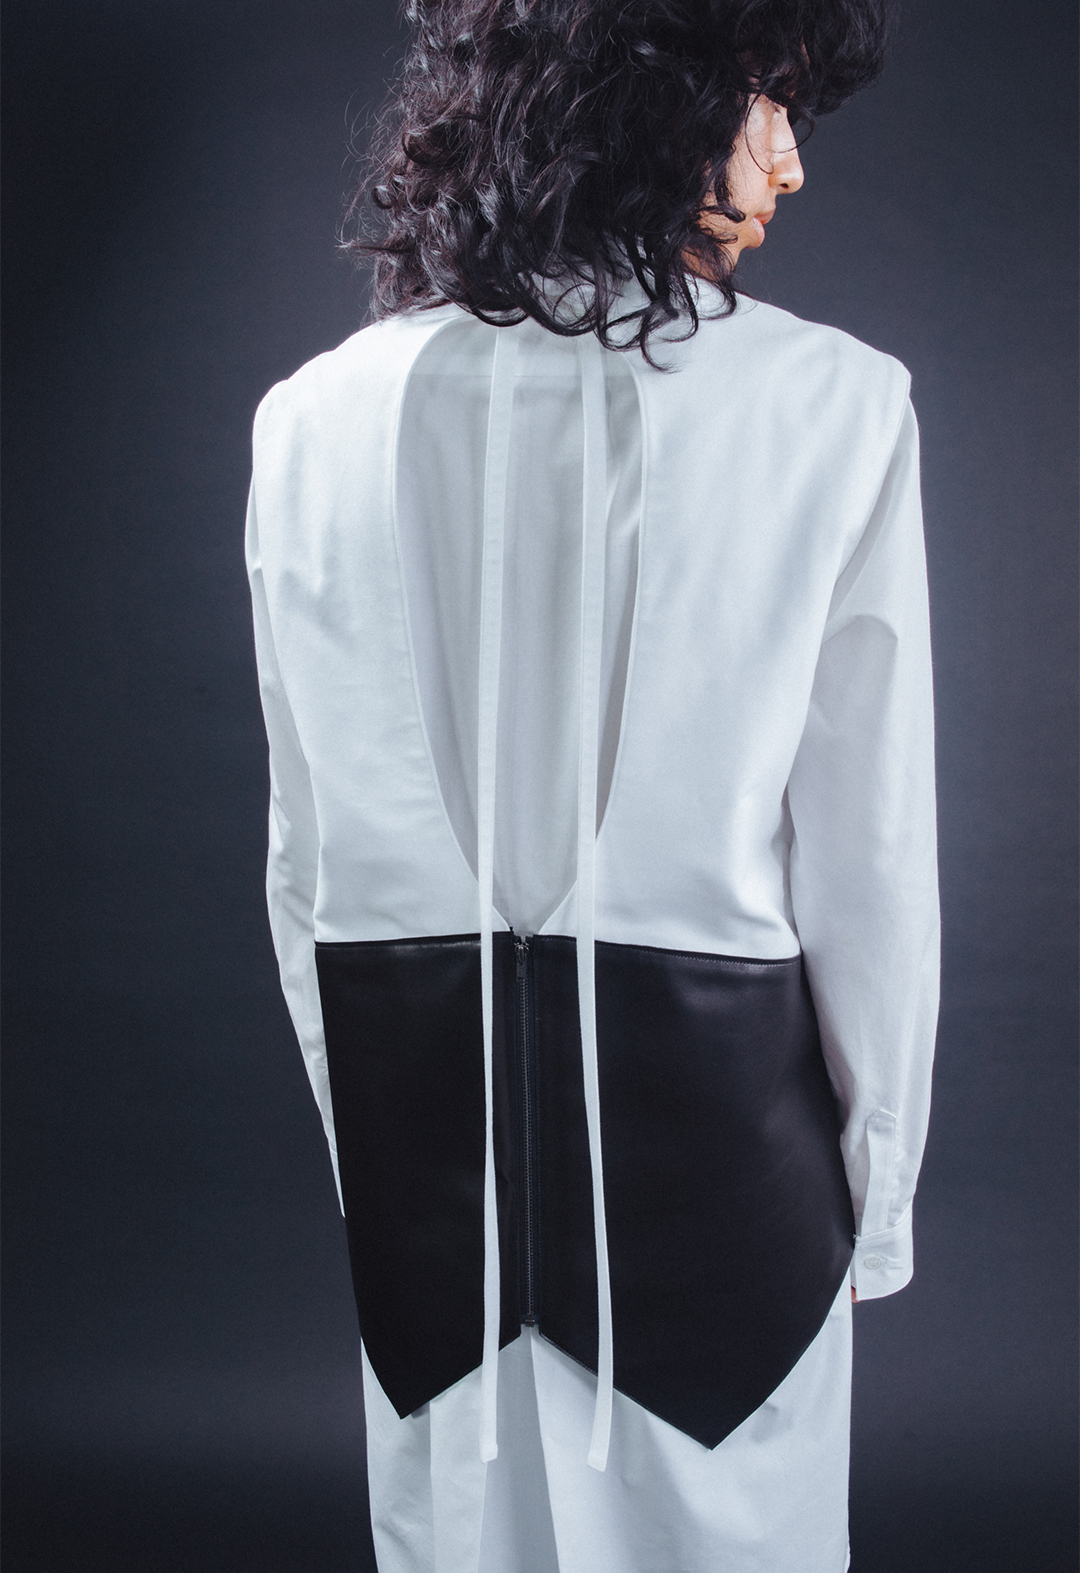 Photo of the model, Aria Puga, wearing a white cotton tunic shirt and a white cotton and black leather open-back top. The open-back top has a cut-out with a tie at the back neck and a zipper at the center back. The model is turned with their back to the camera and their head is turned to the side. The background is black.